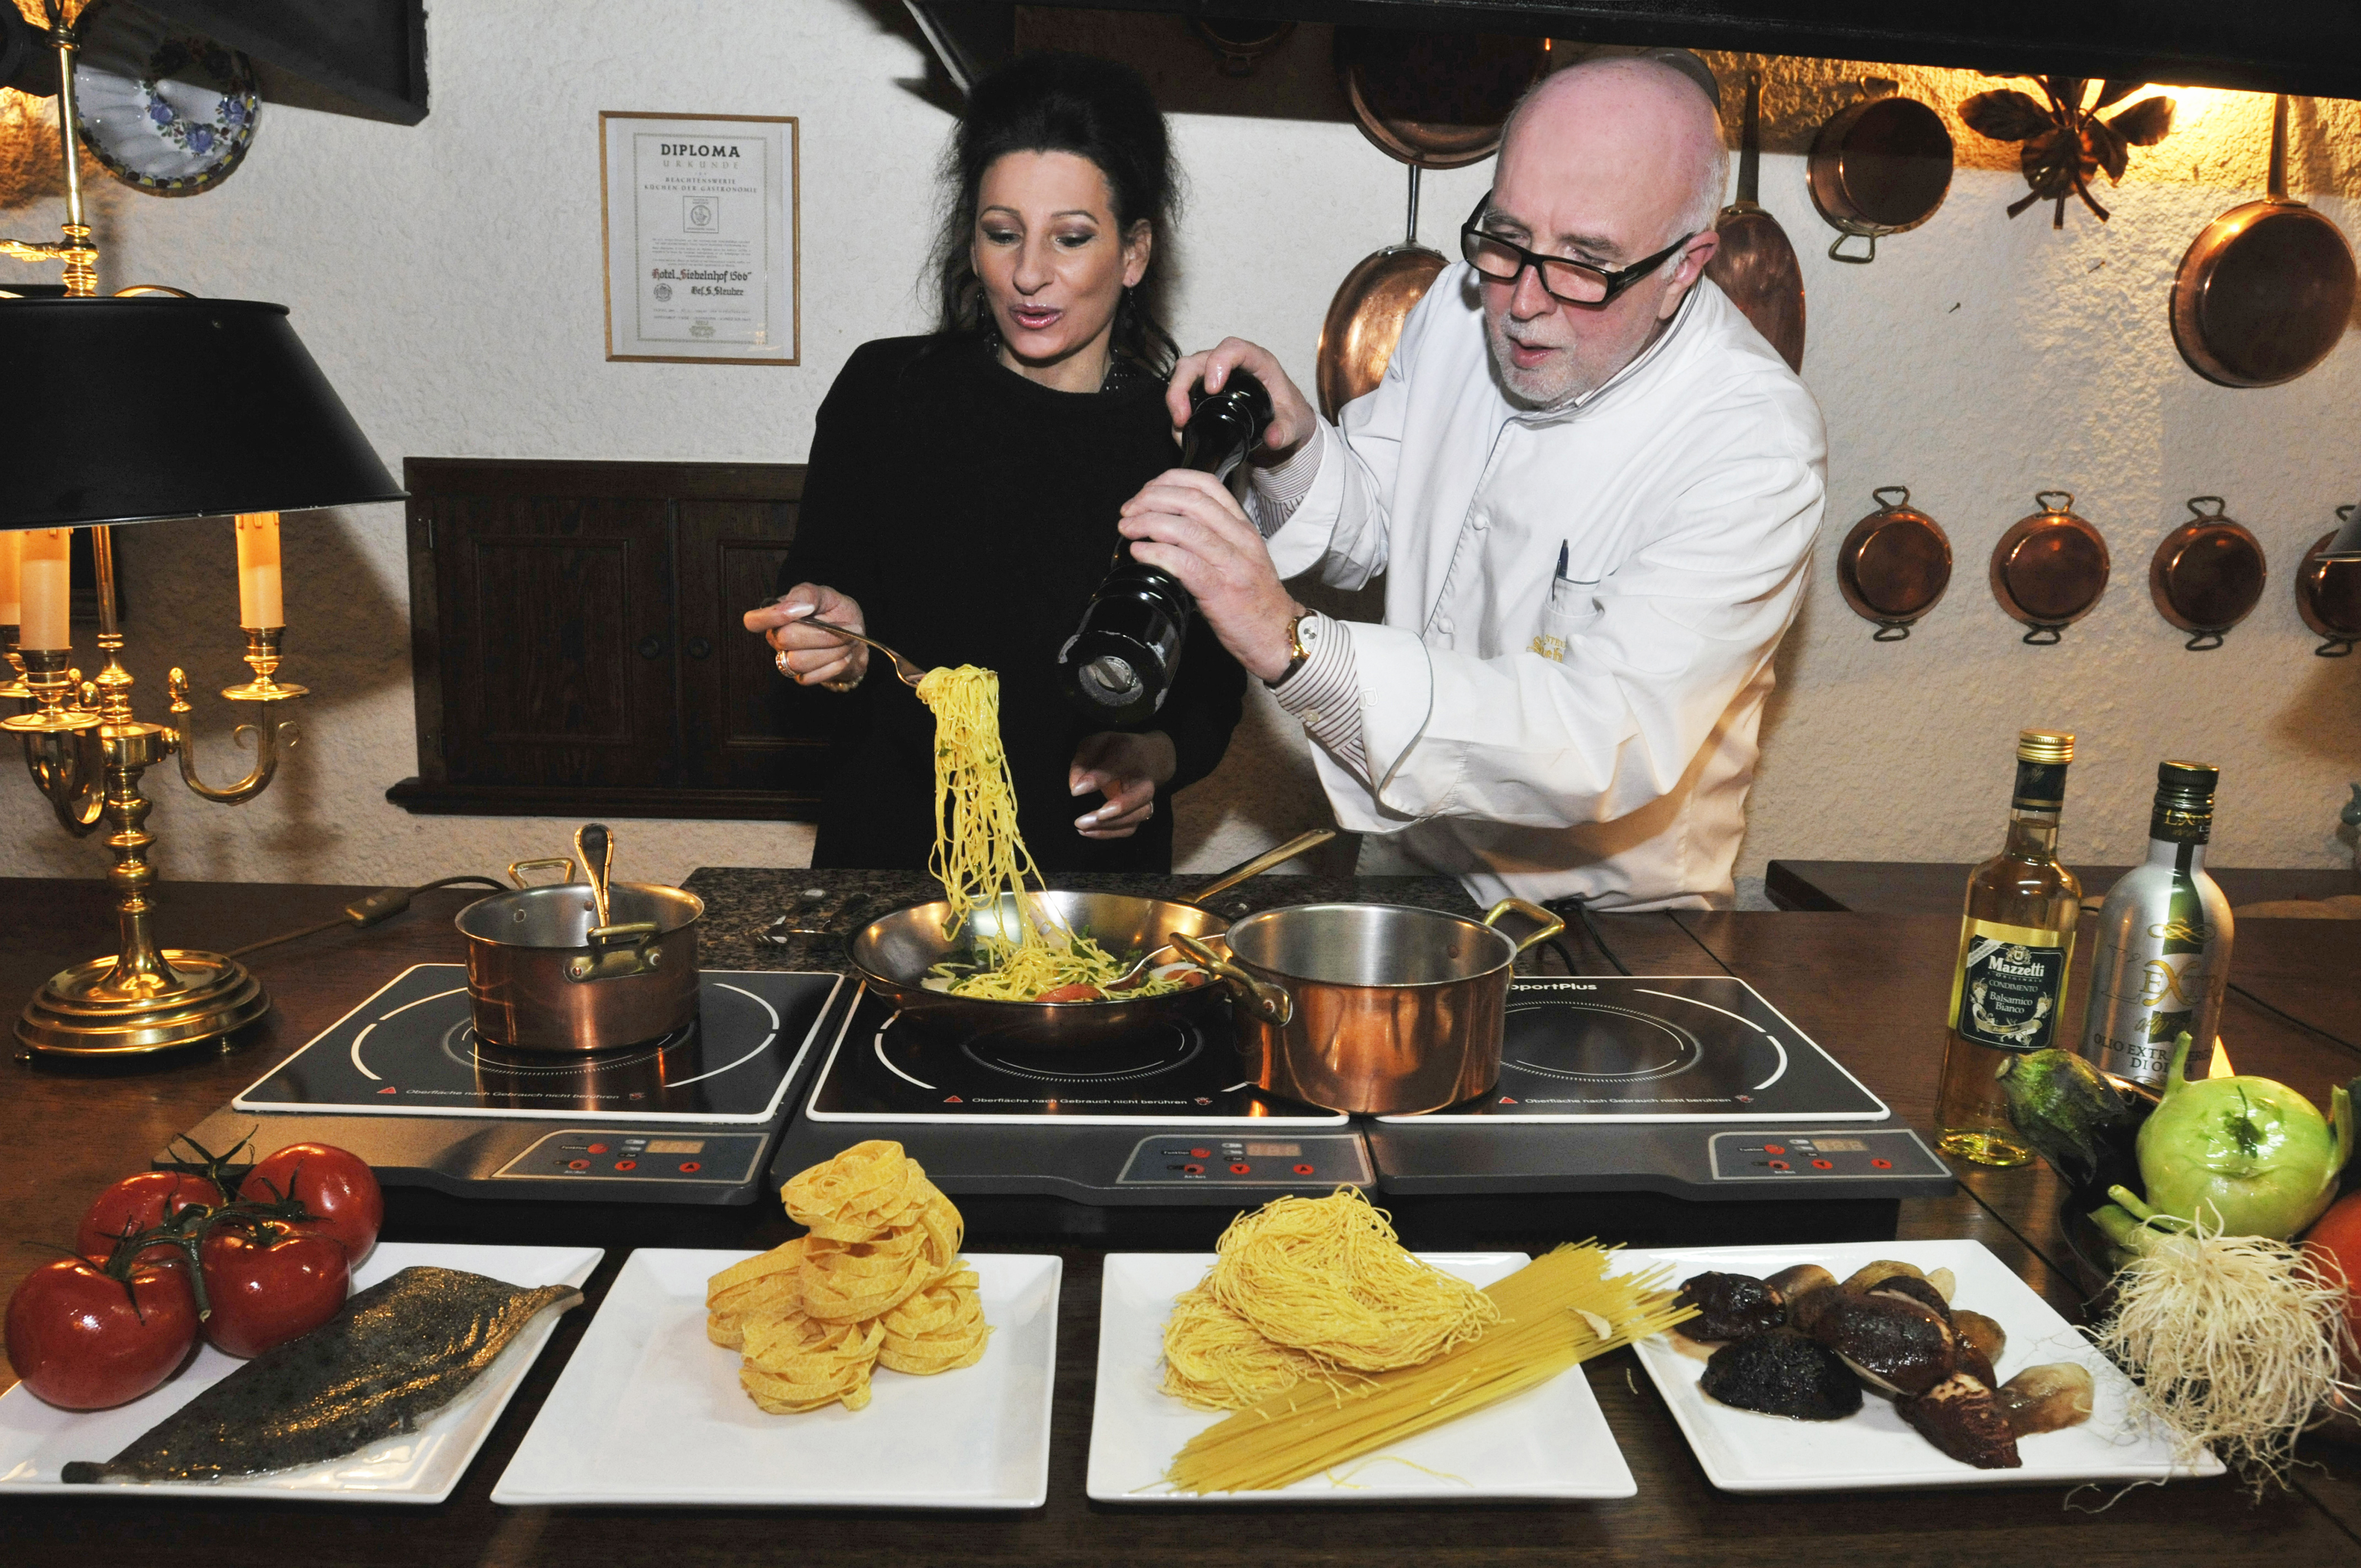 Lucia Aliberti with the Gourmet Cook Erich W. Steuberher⚘Cooking⚘Passion⚘Hilchenbach⚘Photo taken from the Newspaper⚘:http://www.luciaaliberti.it #luciaaliberti #erichwsteuber #hilchenbach #cooking #passion